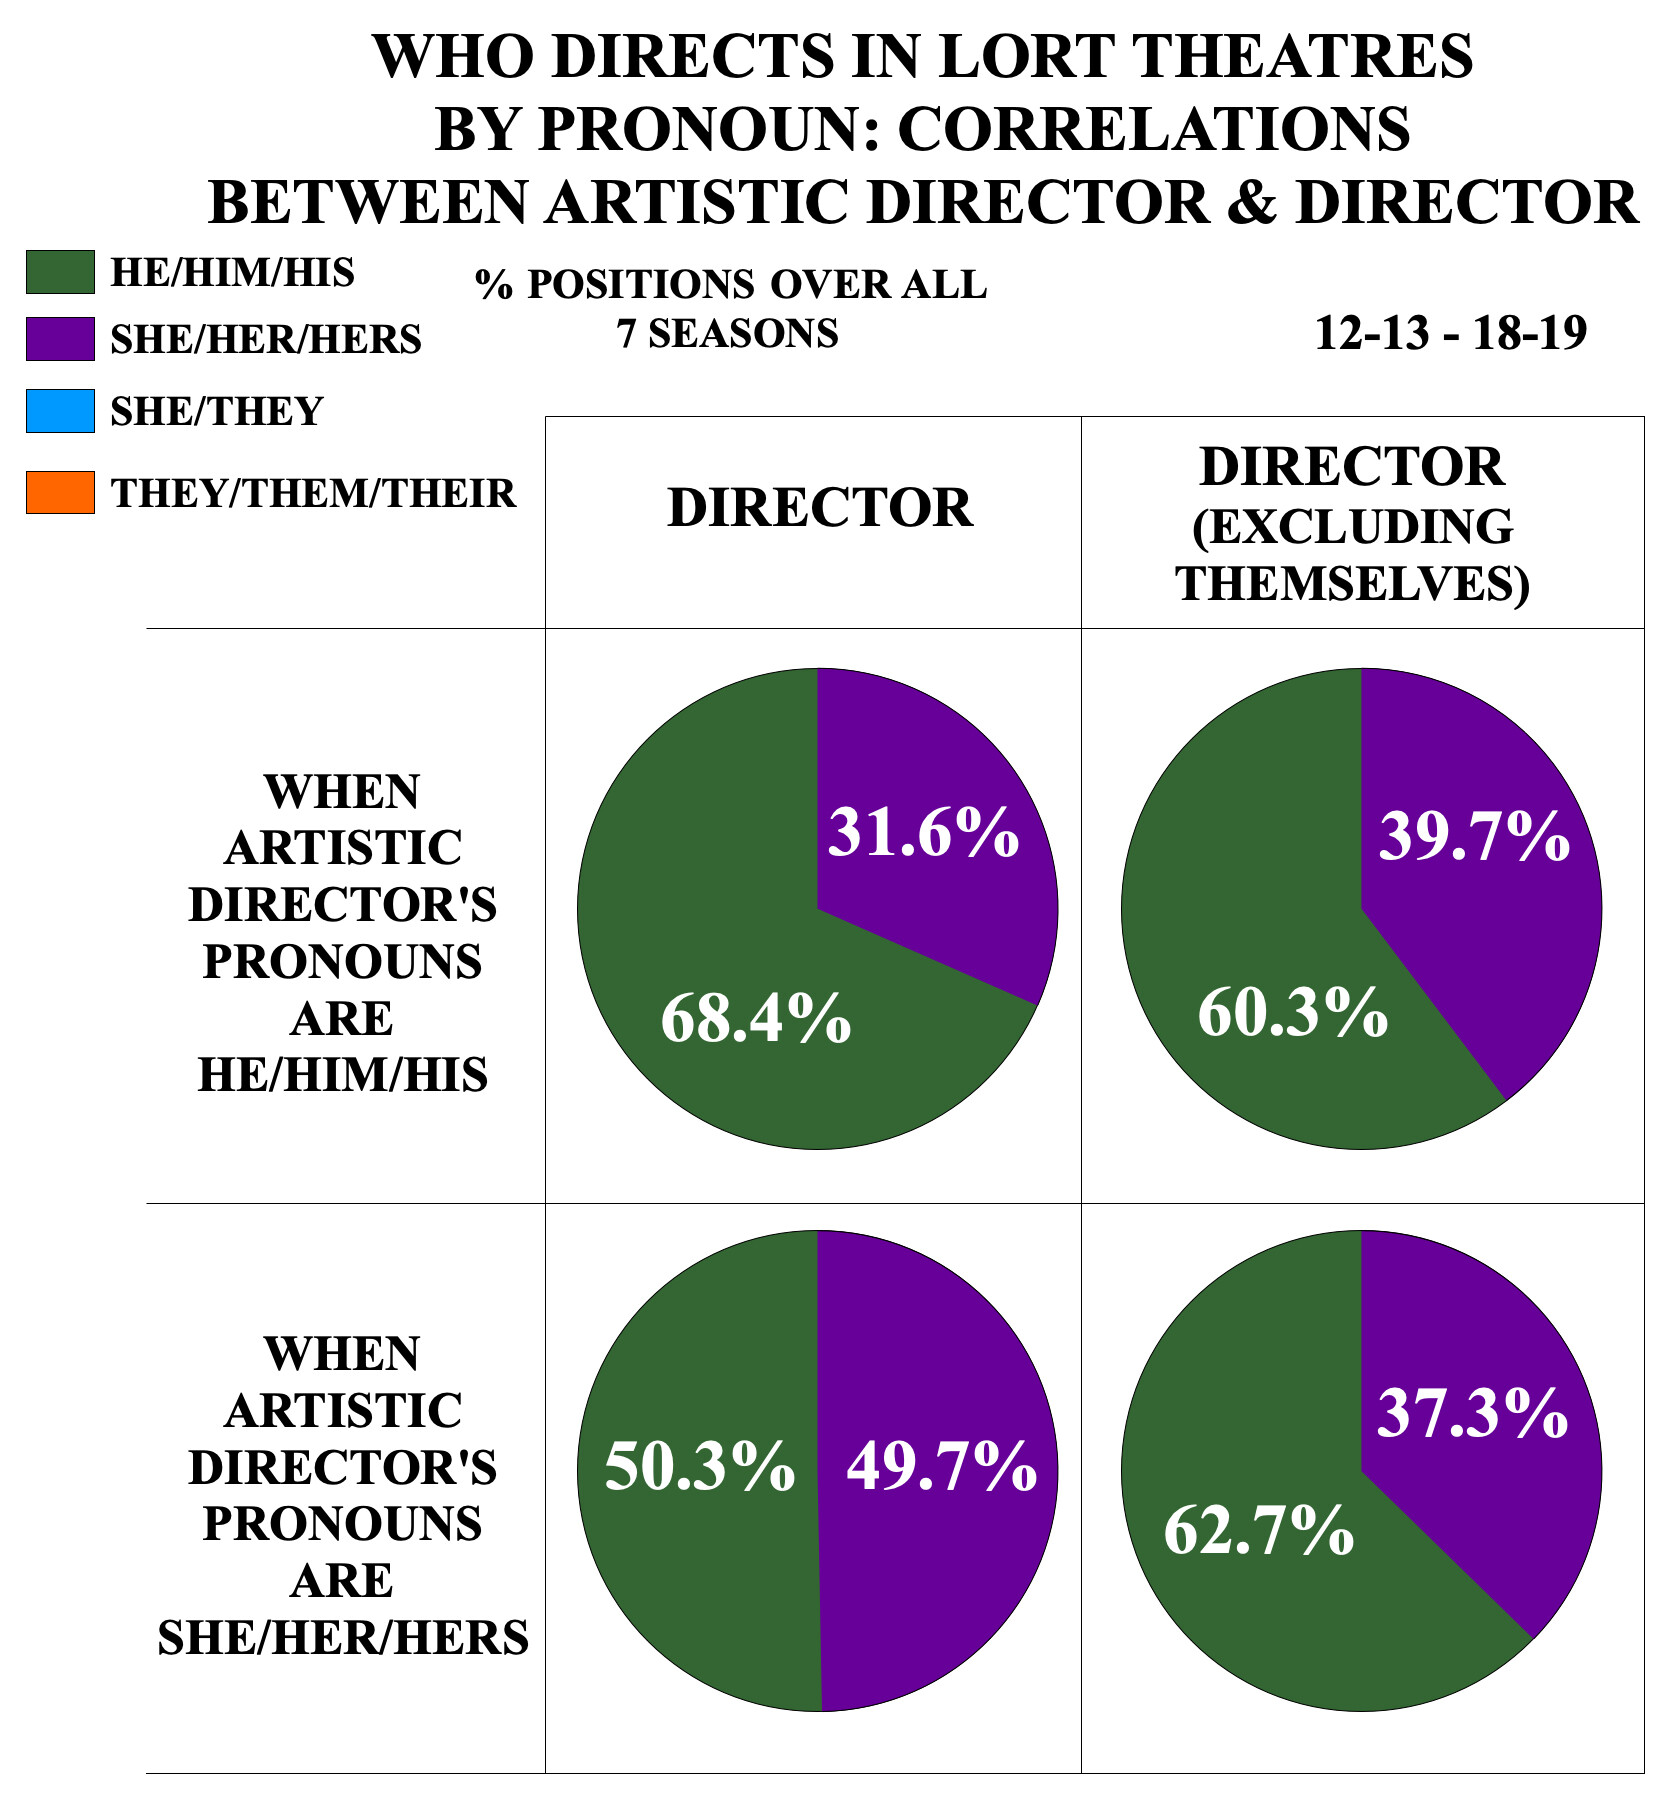 Who Directs in LORT Theatres by Pronoun: Correlations between Artistic Director & Director